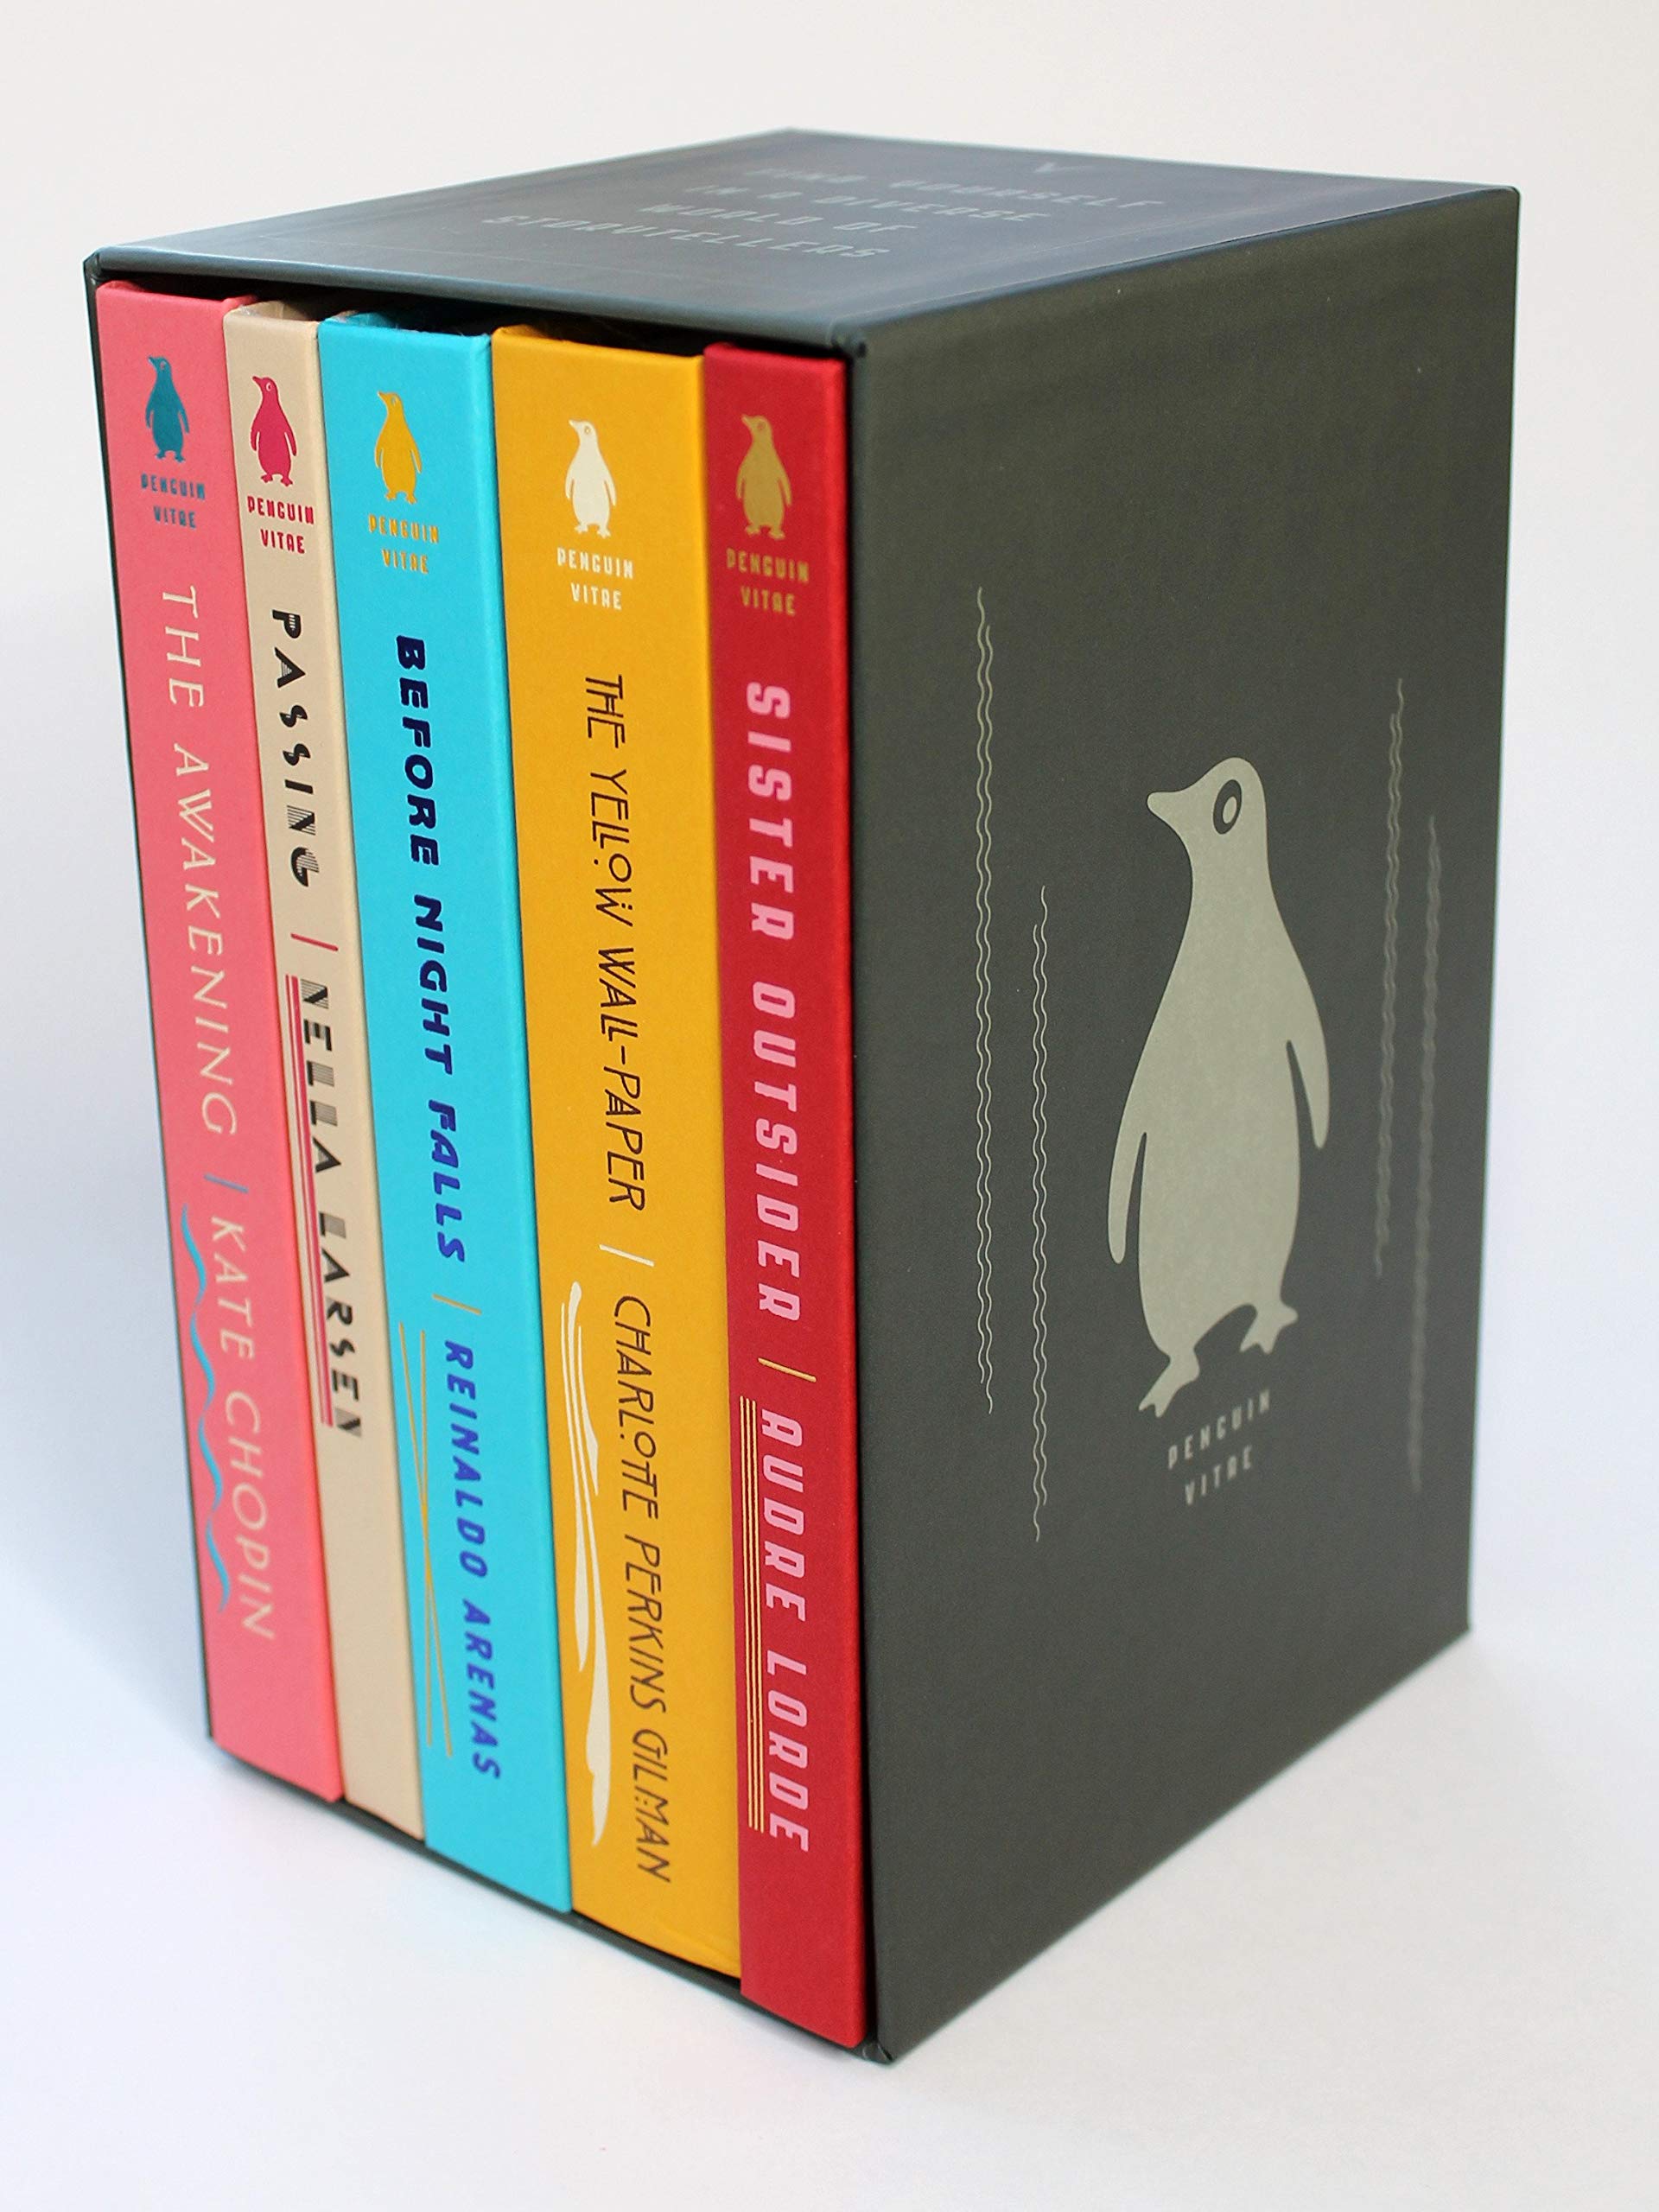 Penguin Vitae Series 5-Book Box Set: The Awakening and Selected Stories; Before Night Falls; Passing; Sister Outsider; The Yellow Wall-Paper and Selected Writings